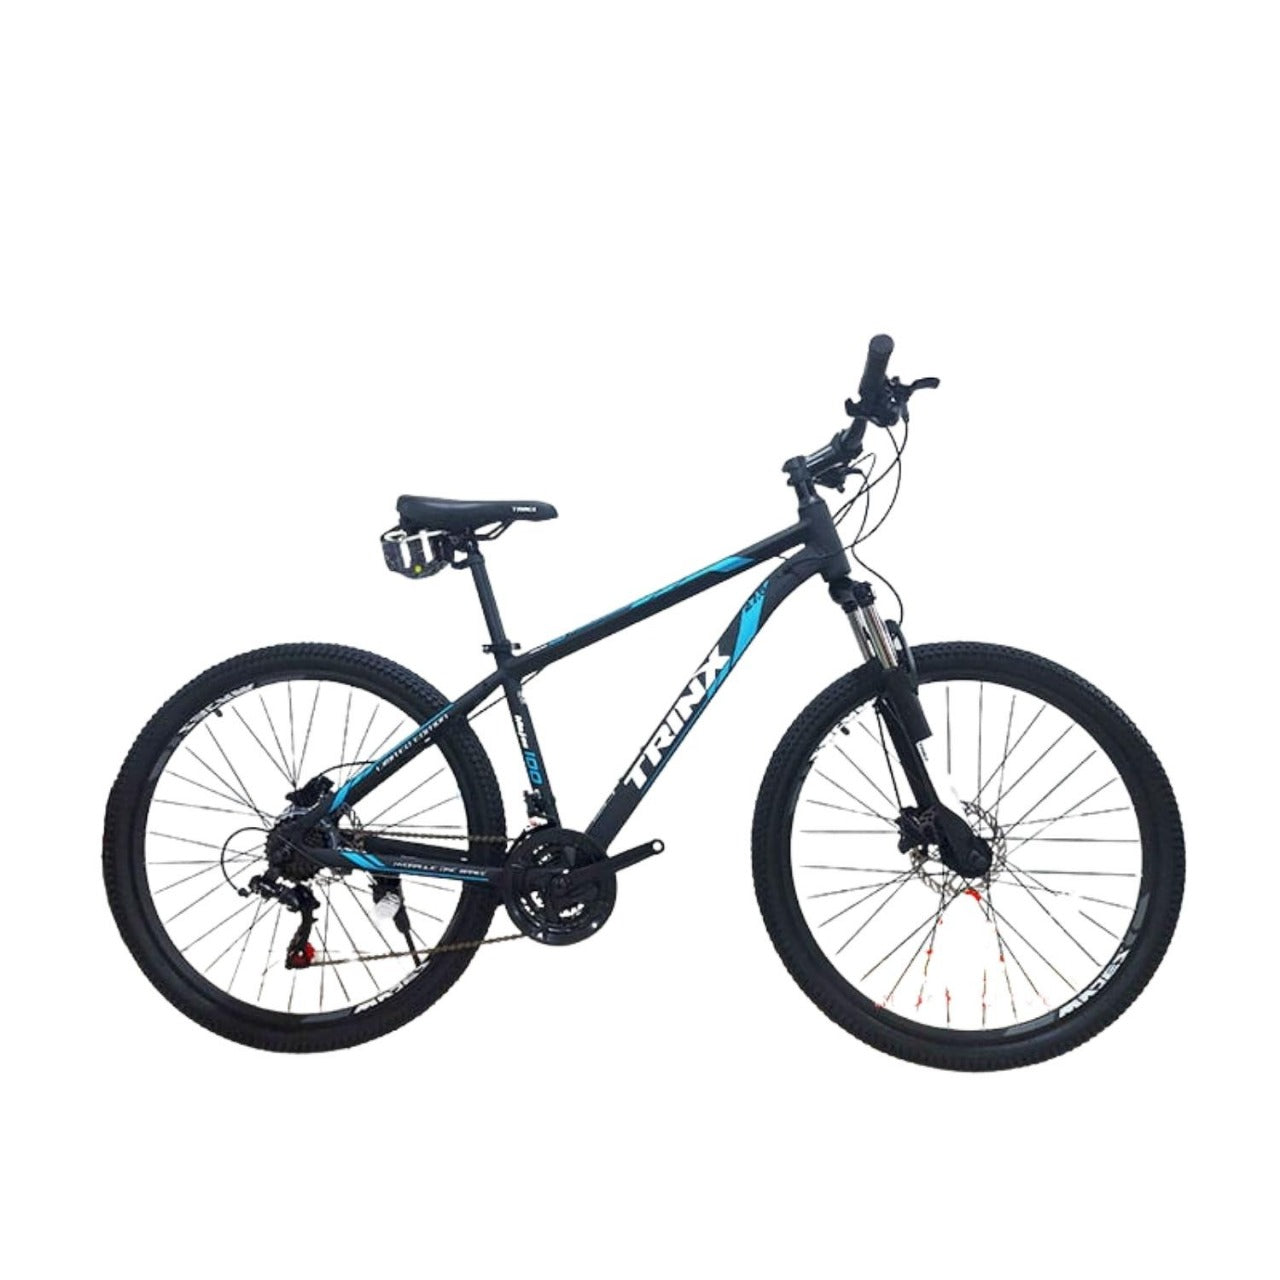 Trinx Mountain Bike M100 LIMITED EDITION alloy 29 inch